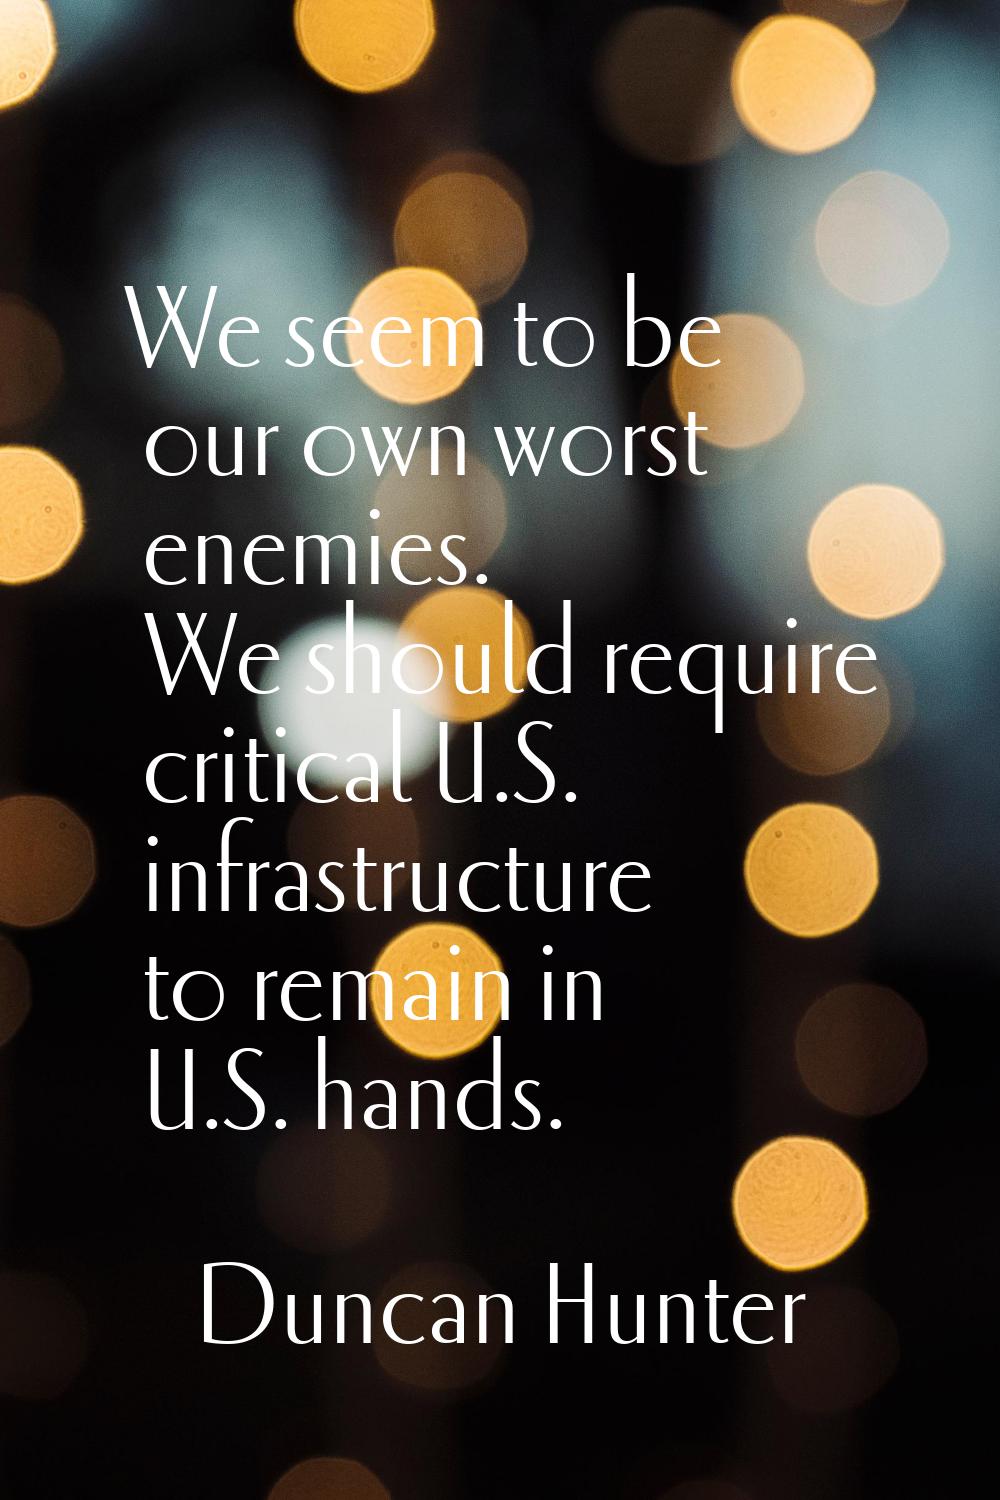 We seem to be our own worst enemies. We should require critical U.S. infrastructure to remain in U.